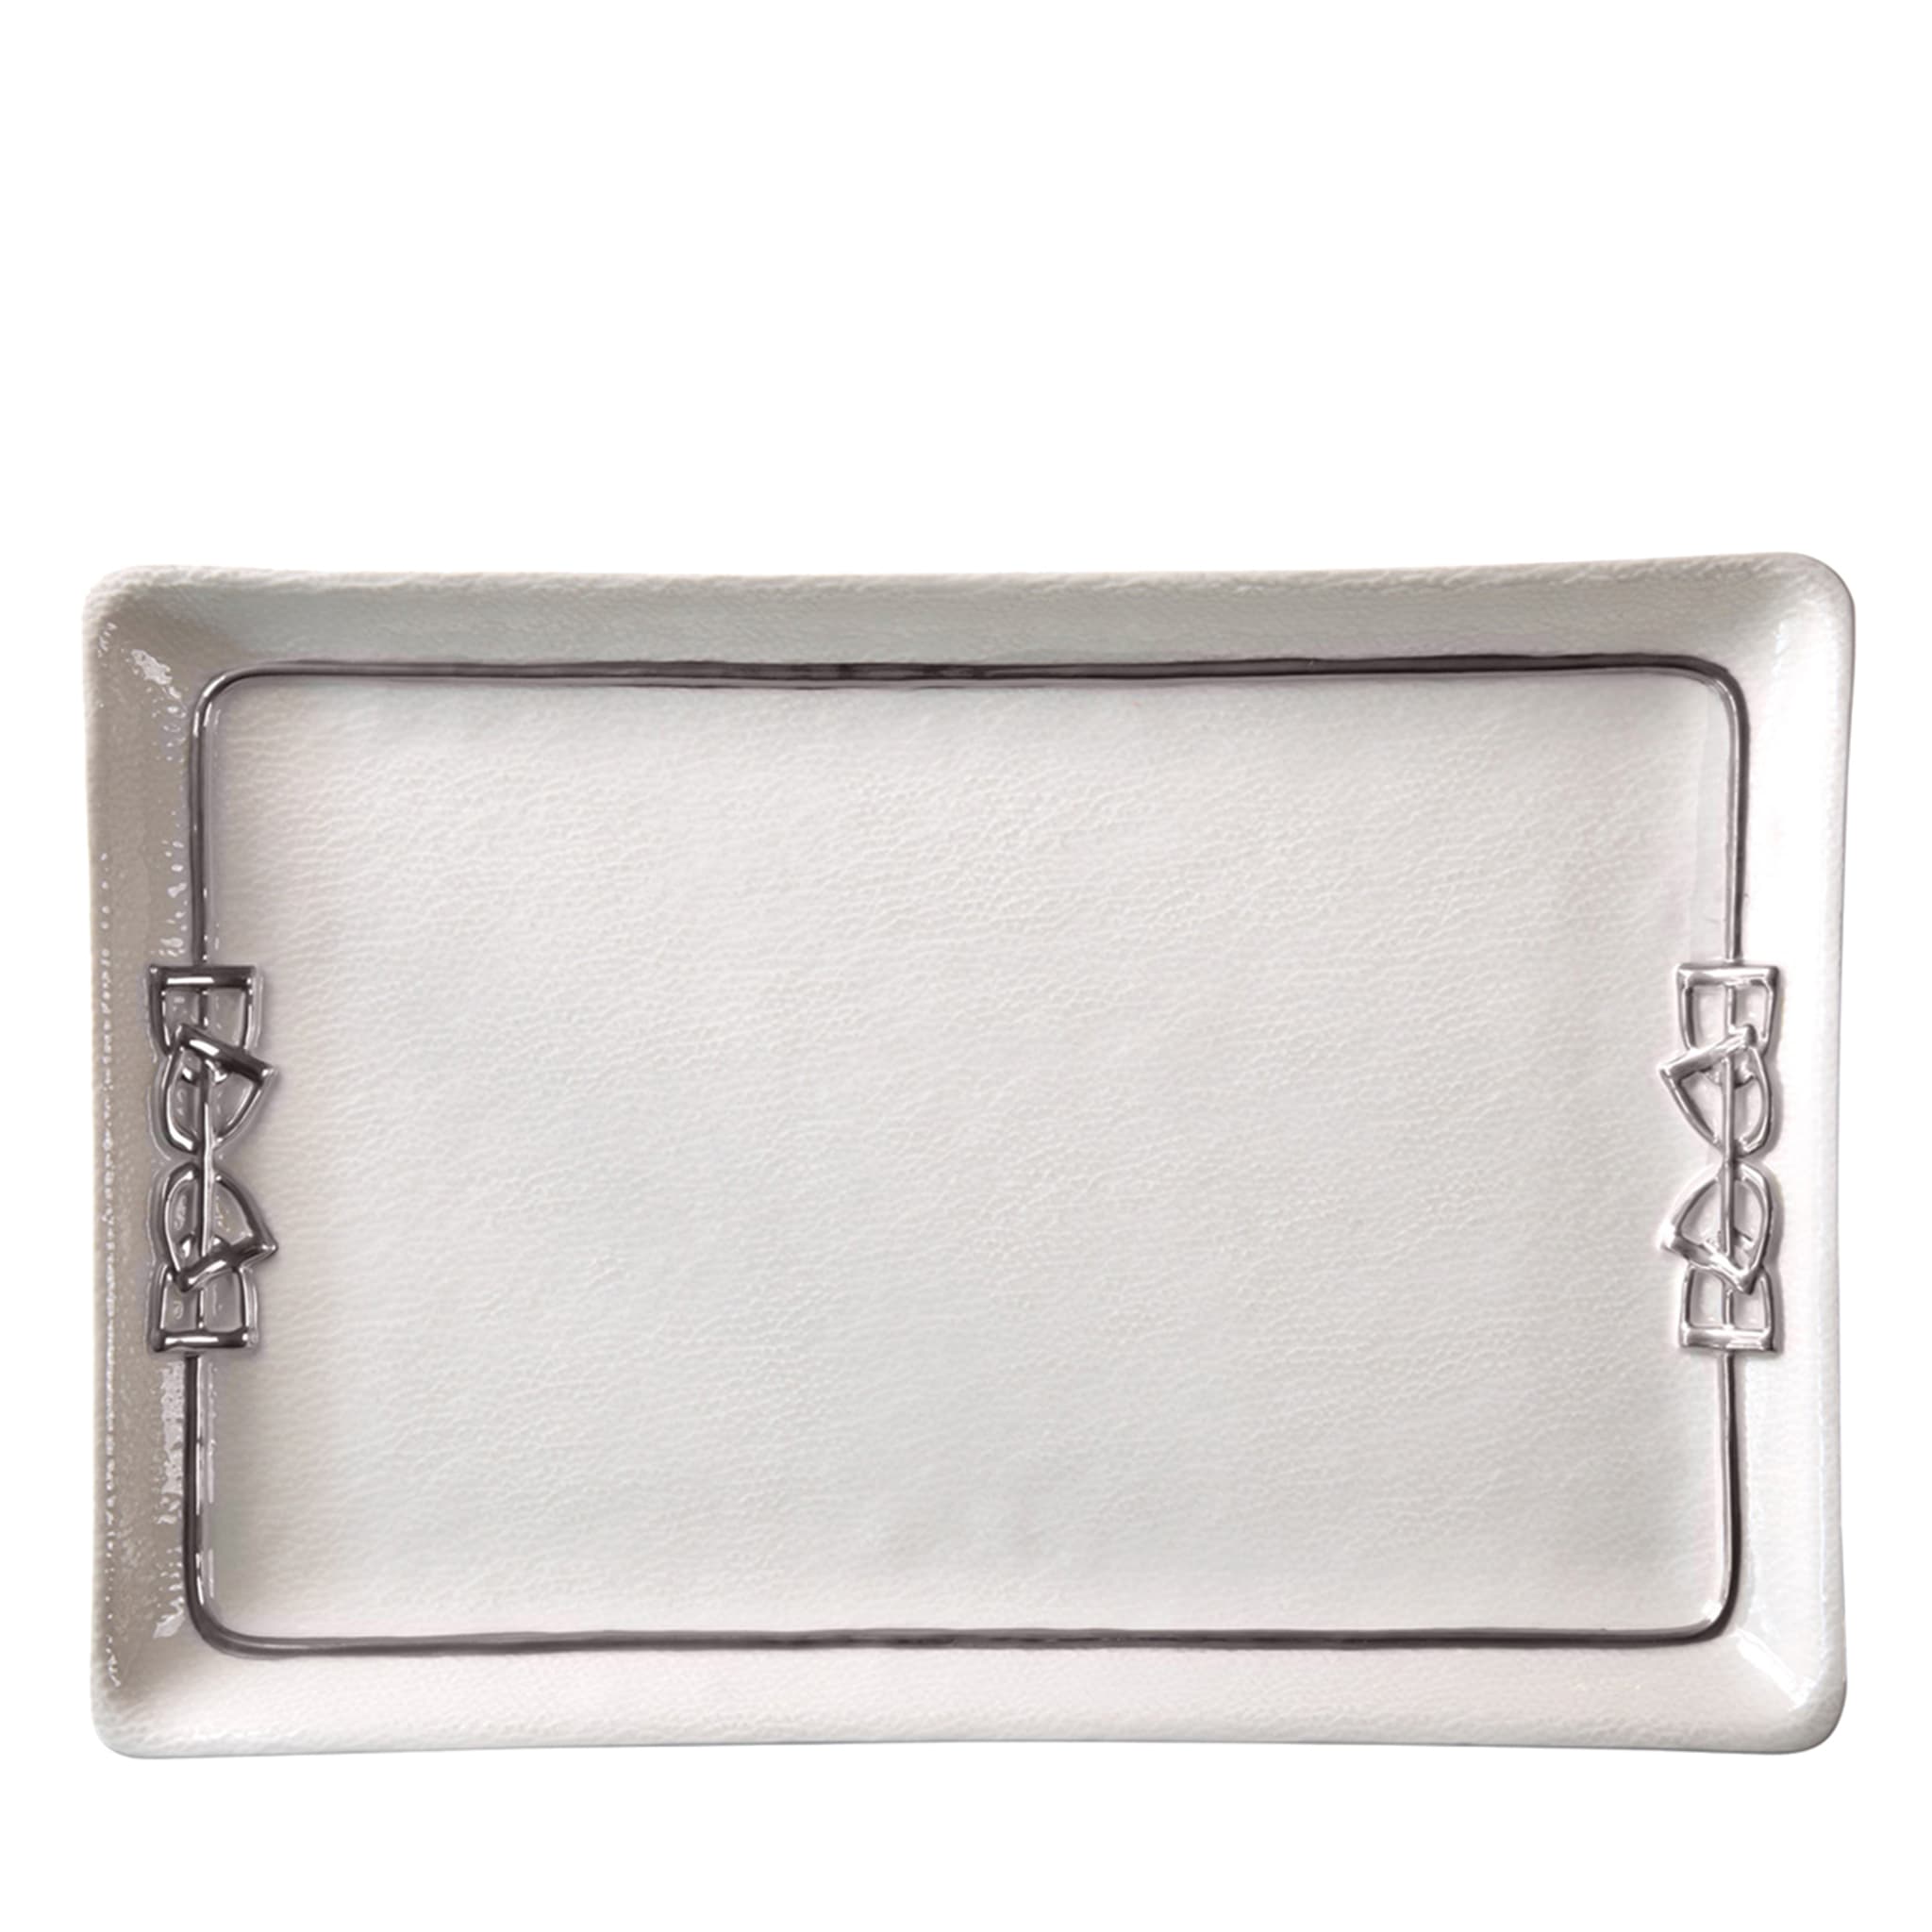 DRESSAGE TRAY - WHITE AND SILVER - Main view